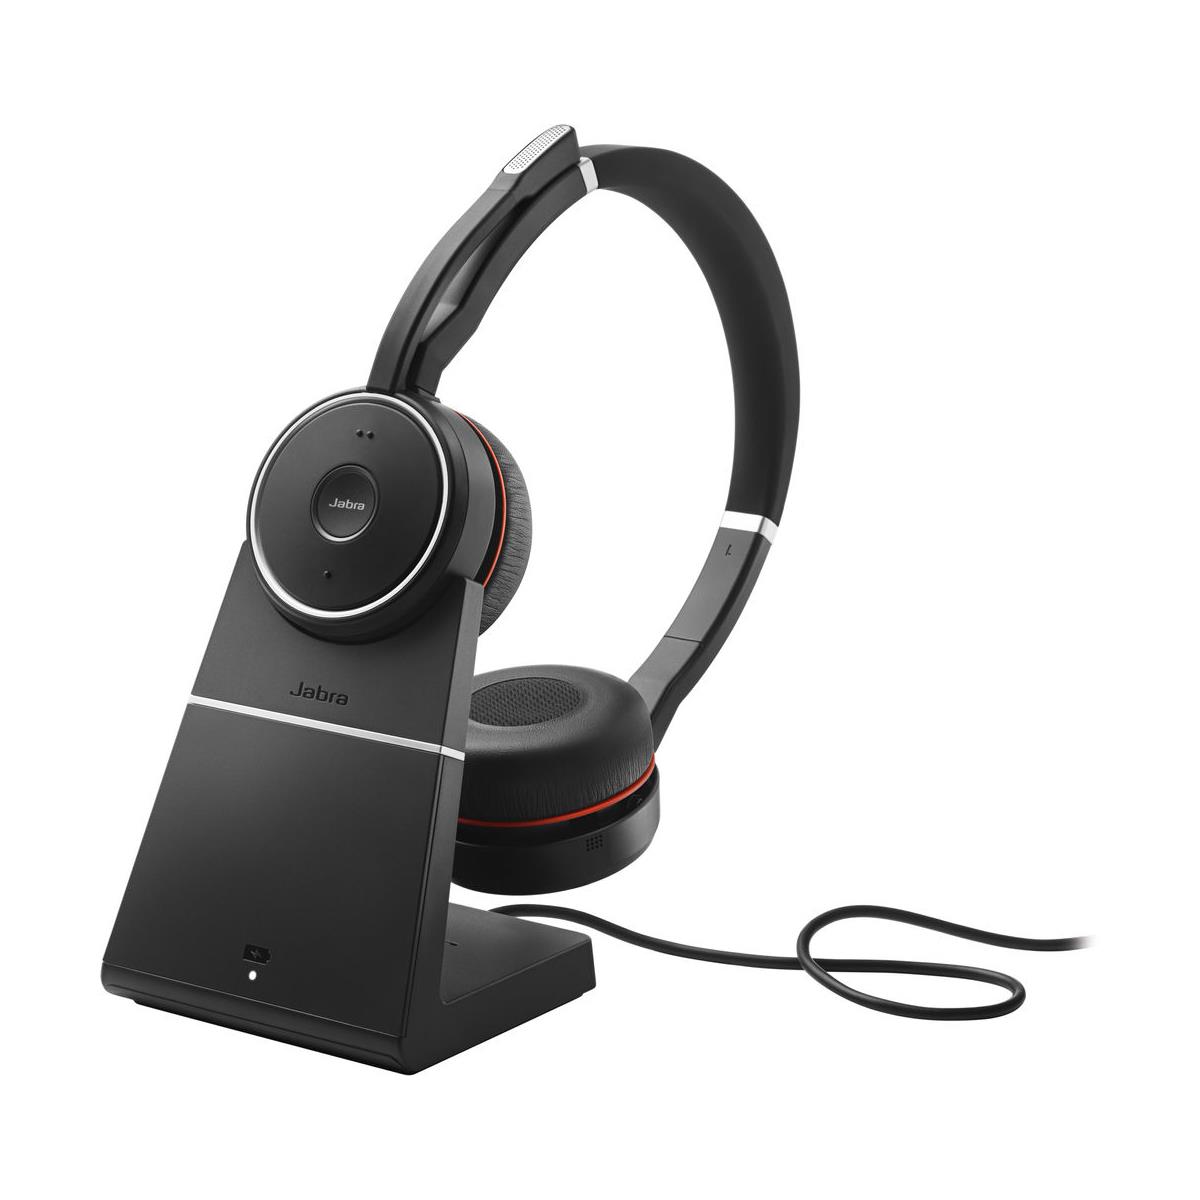 Image of Jabra Evolve 75 UC Stereo Bluetooth Headset with USB Adapter and Charging Stand